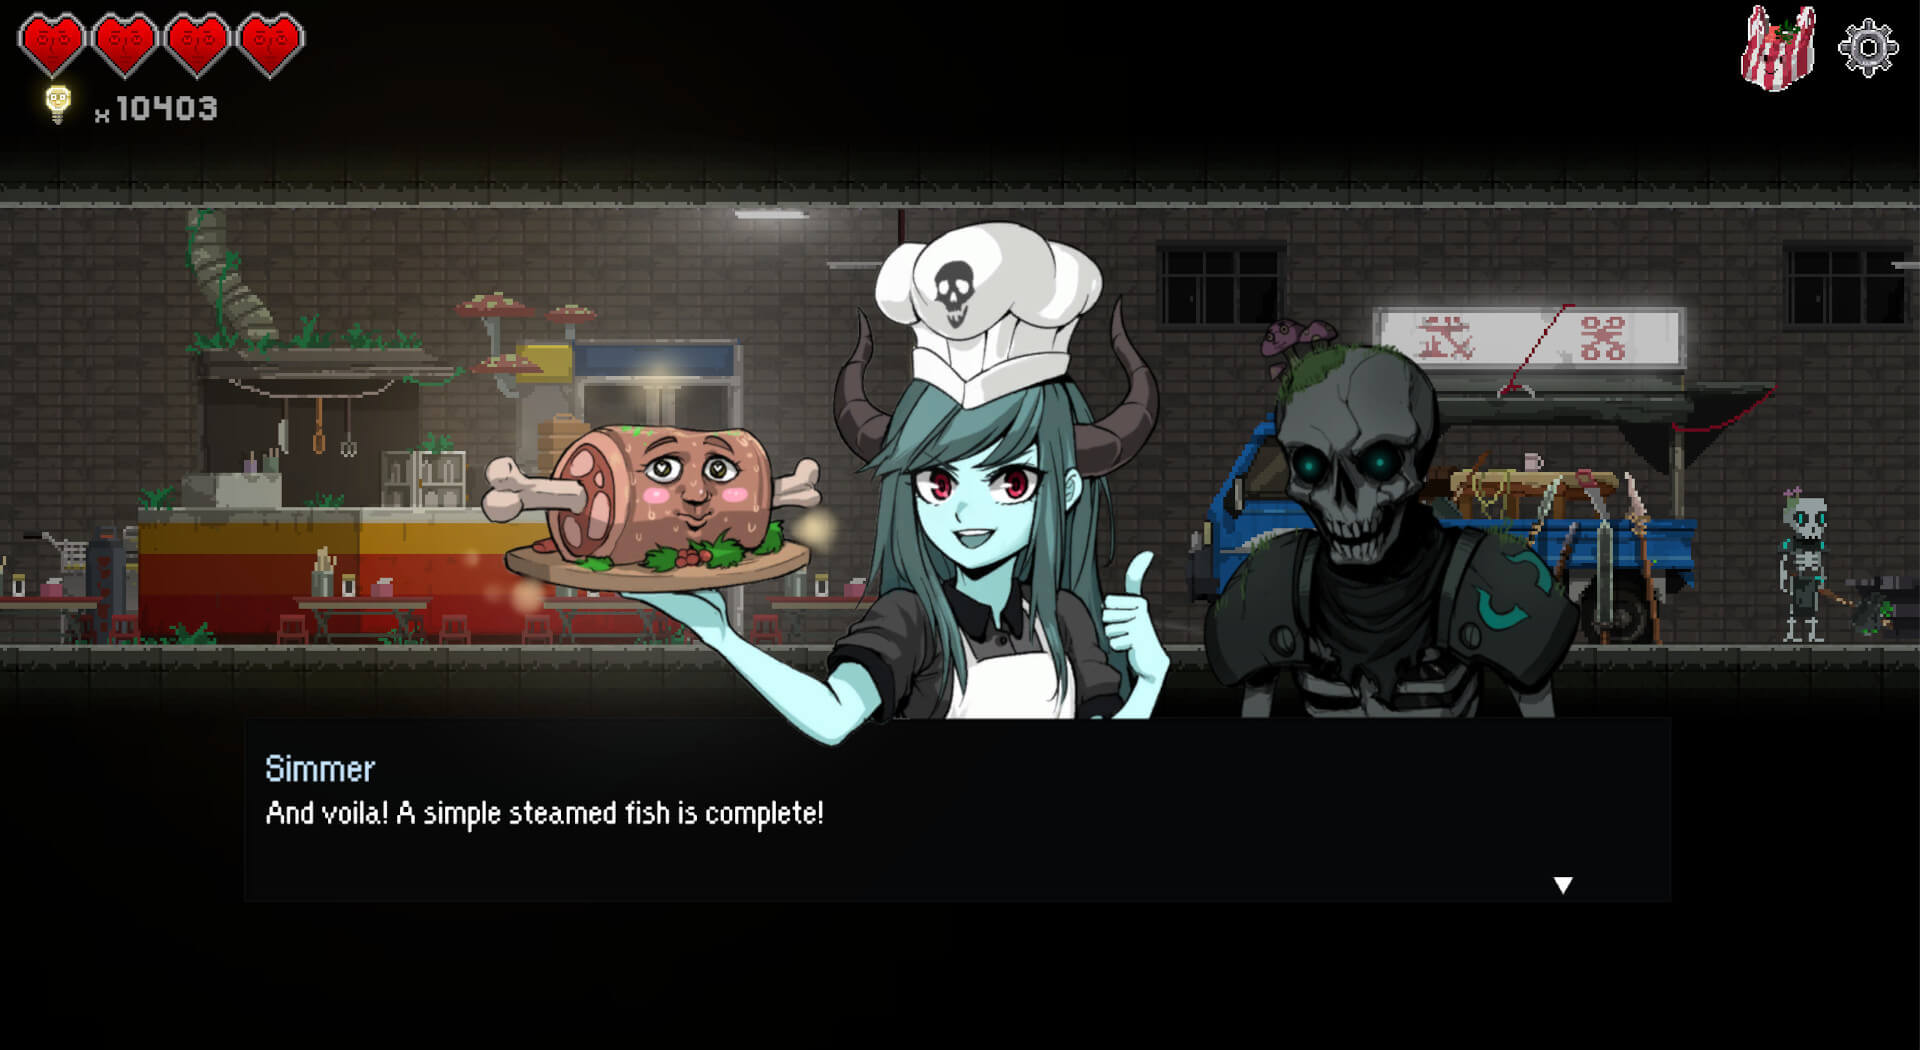 A dialogue scene in Dungeon Munchies